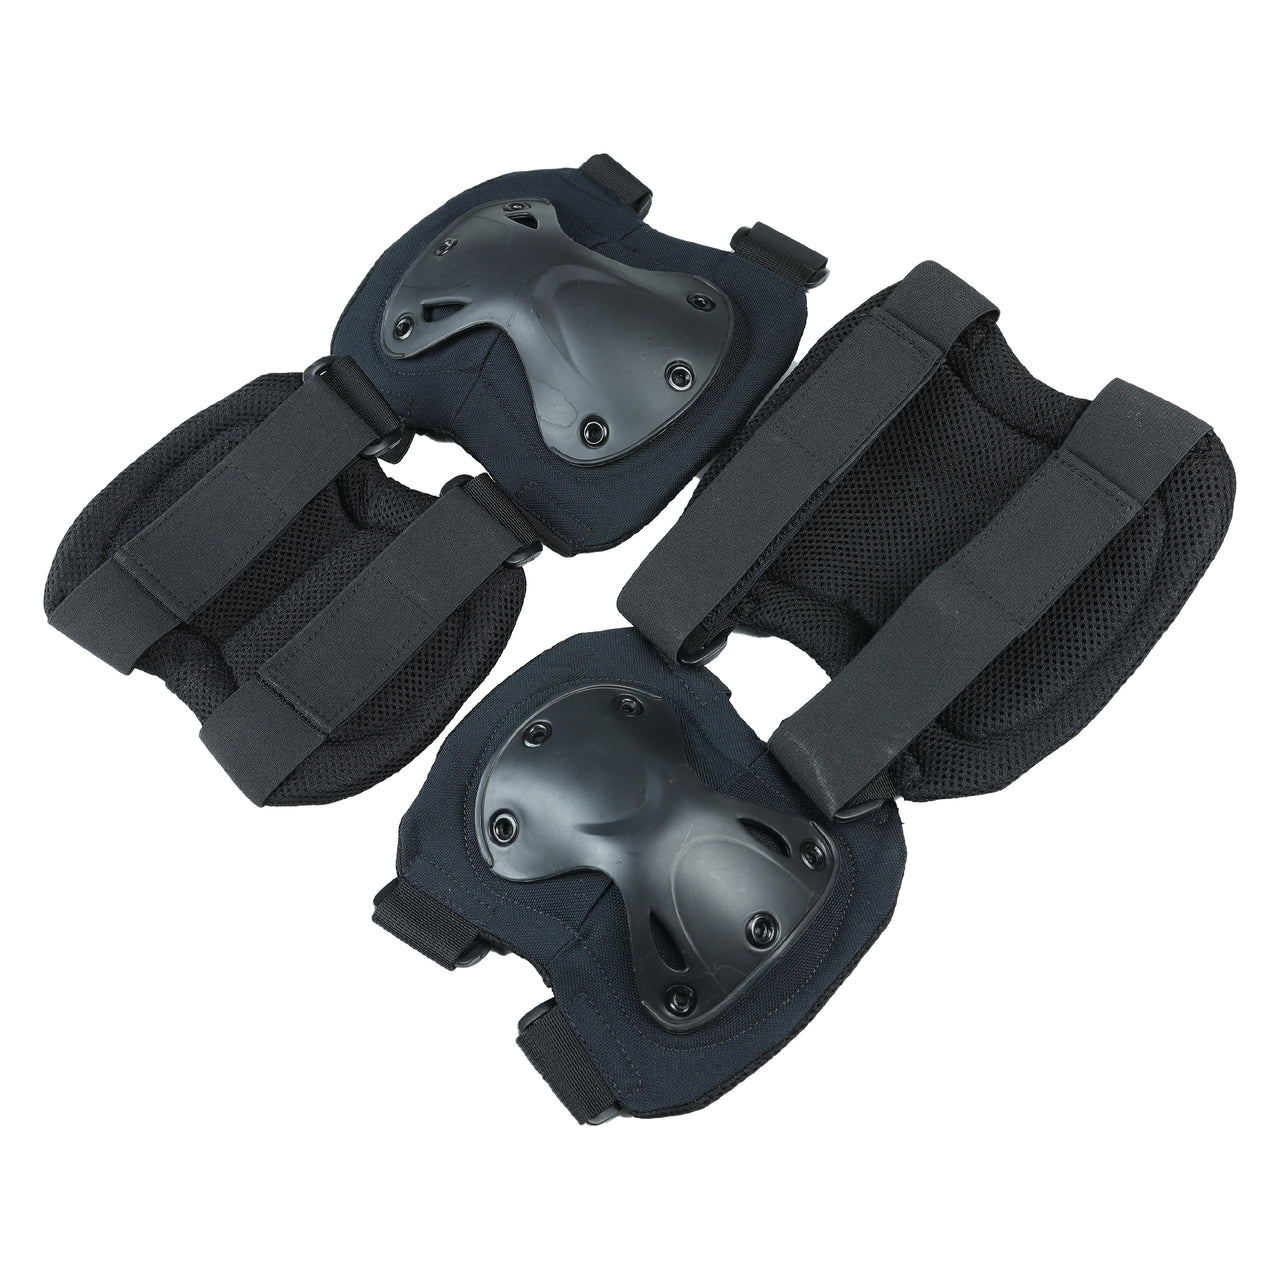 Set of 4 Tactical Knee and Elbow Pads - Black